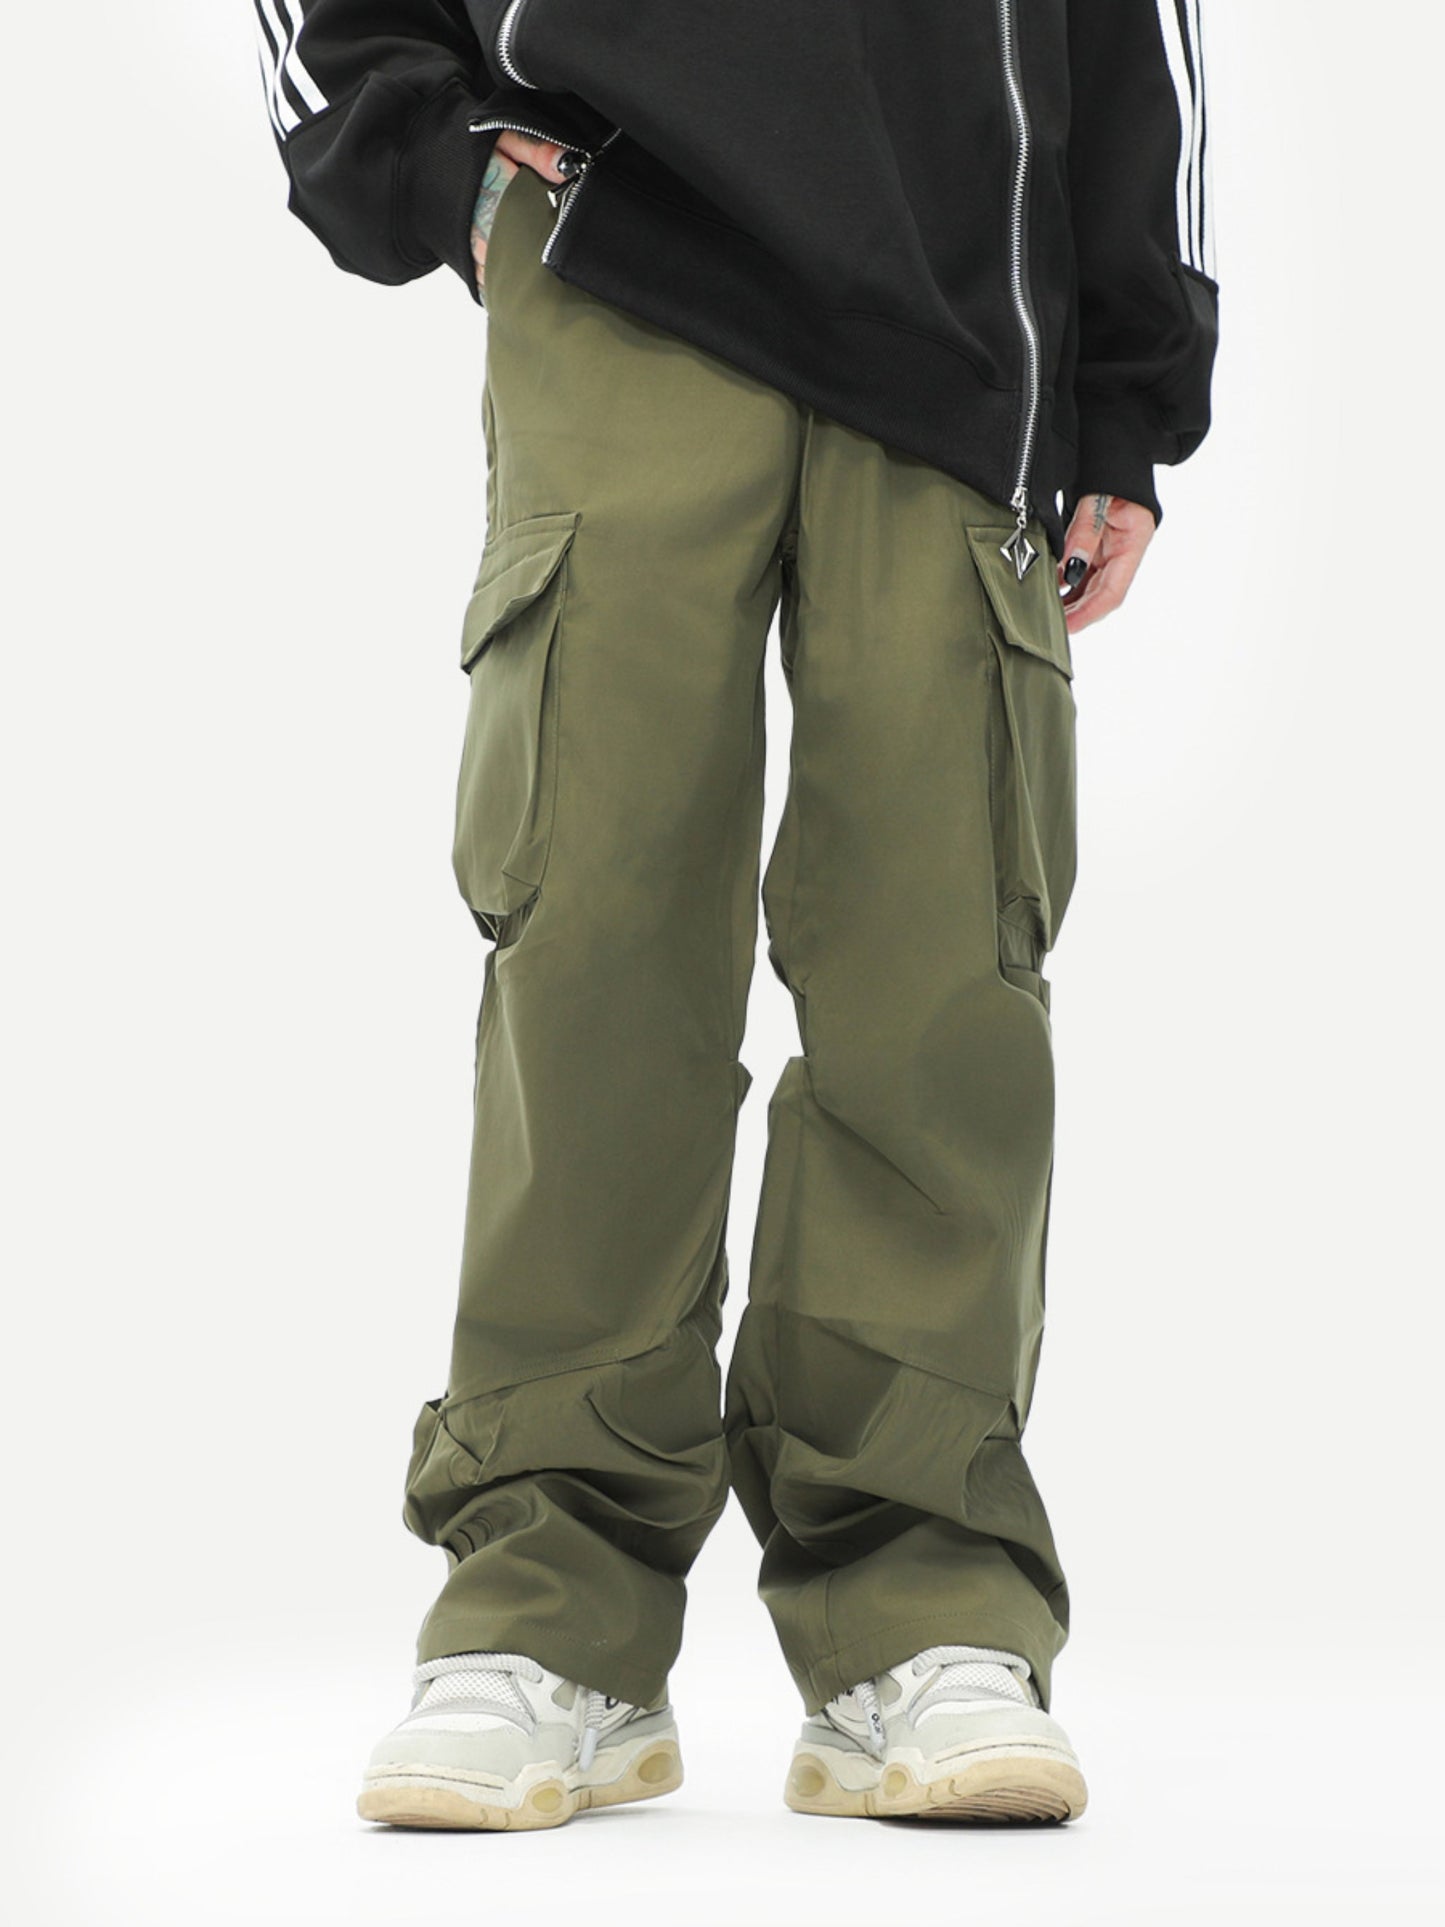 Unisex 2 Colors Mid Waist Casual Trousers Cargo Pant